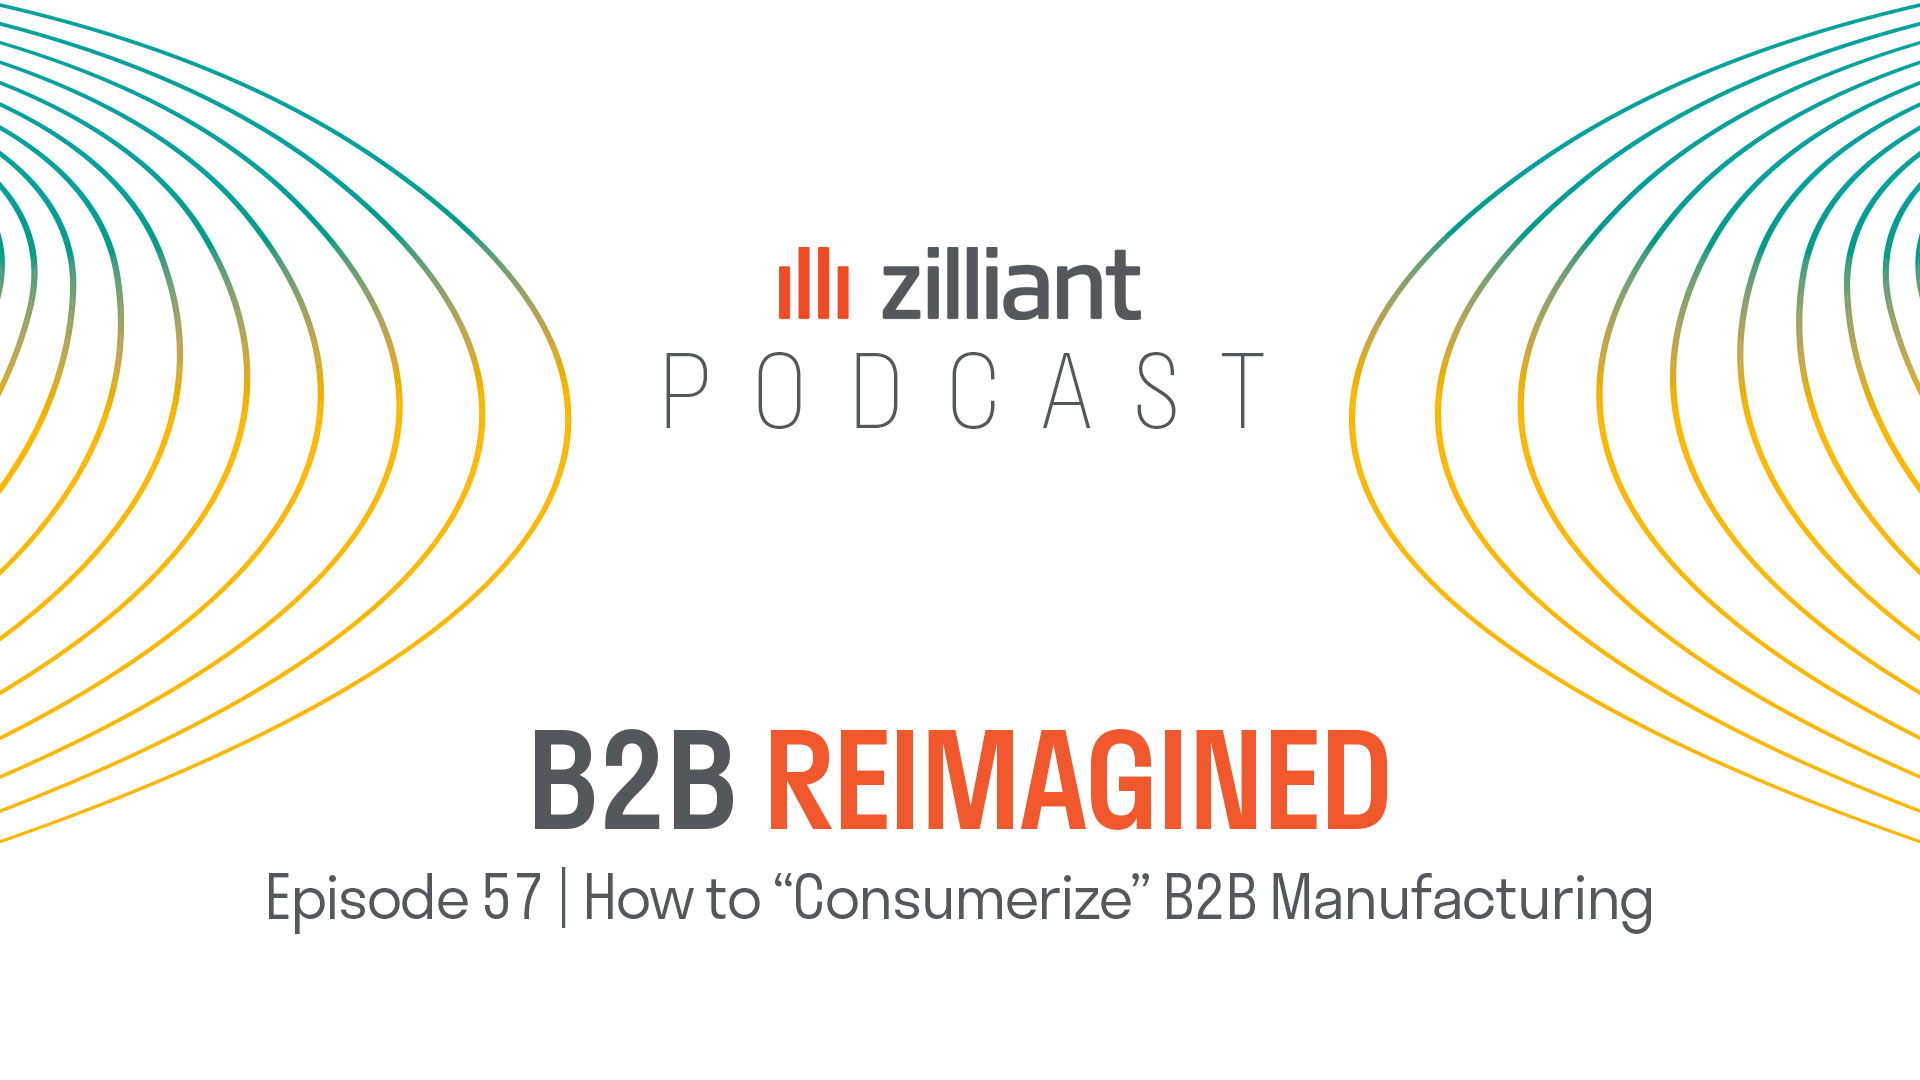 How to “Consumerize” B2B Manufacturing